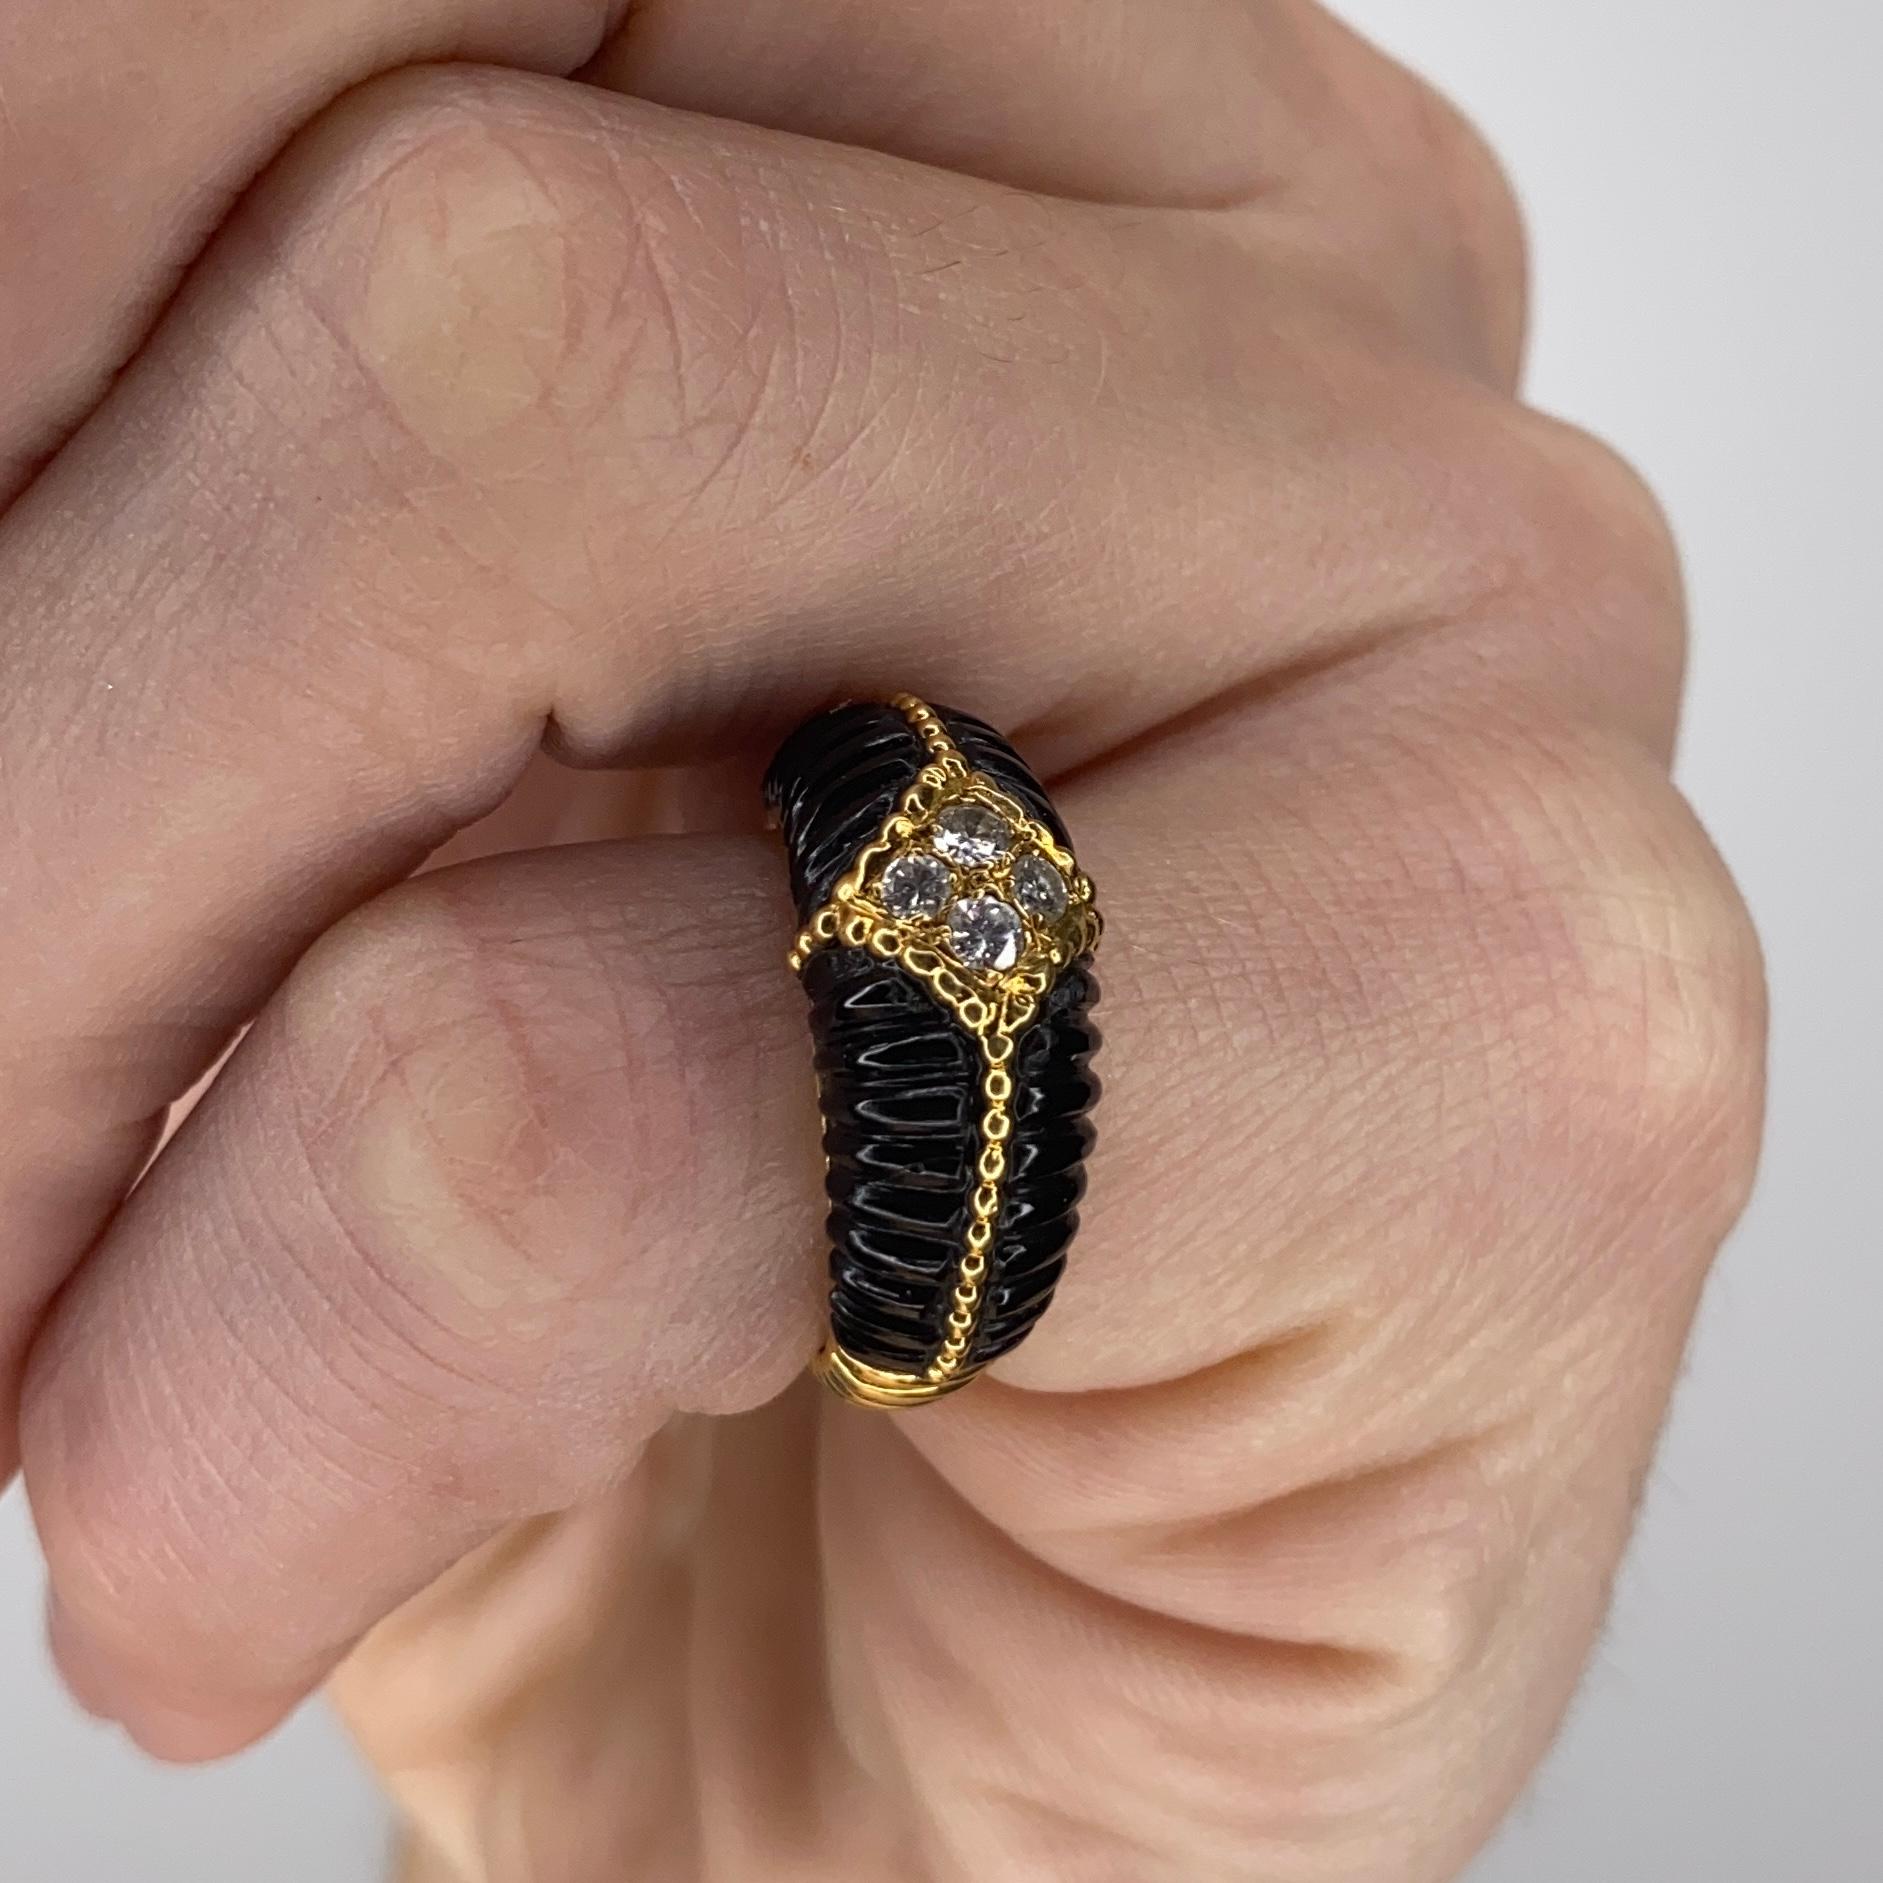 Van Cleef & Arpels 1970 Paris Fluted Onyx Ring in 18Kt Yellow Gold with Diamonds 1